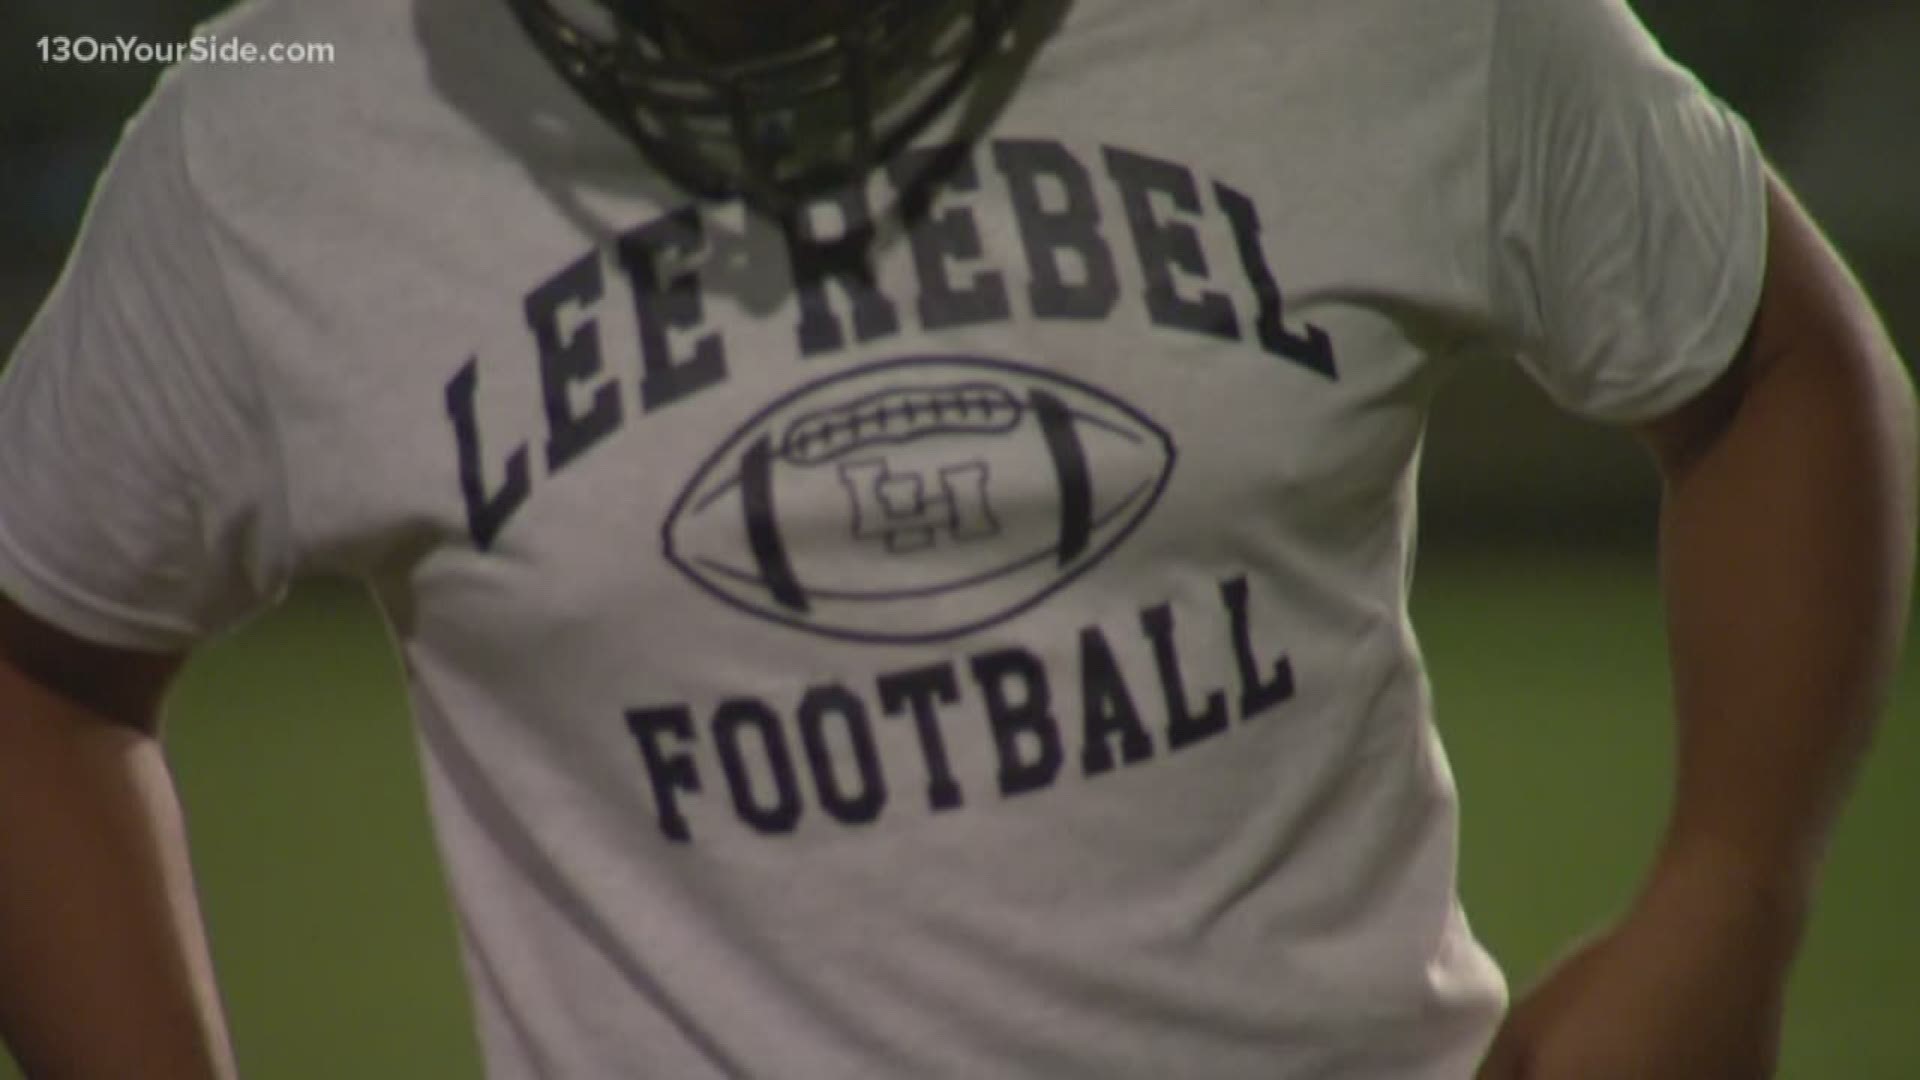 After changing the name of their mascot earlier this year, Godfrey-Lee Public Schools have received a number of donations to actually make the transition. The district decided to change its mascot from the "Rebels" to the "Legends" after much controversy and even protests from students.